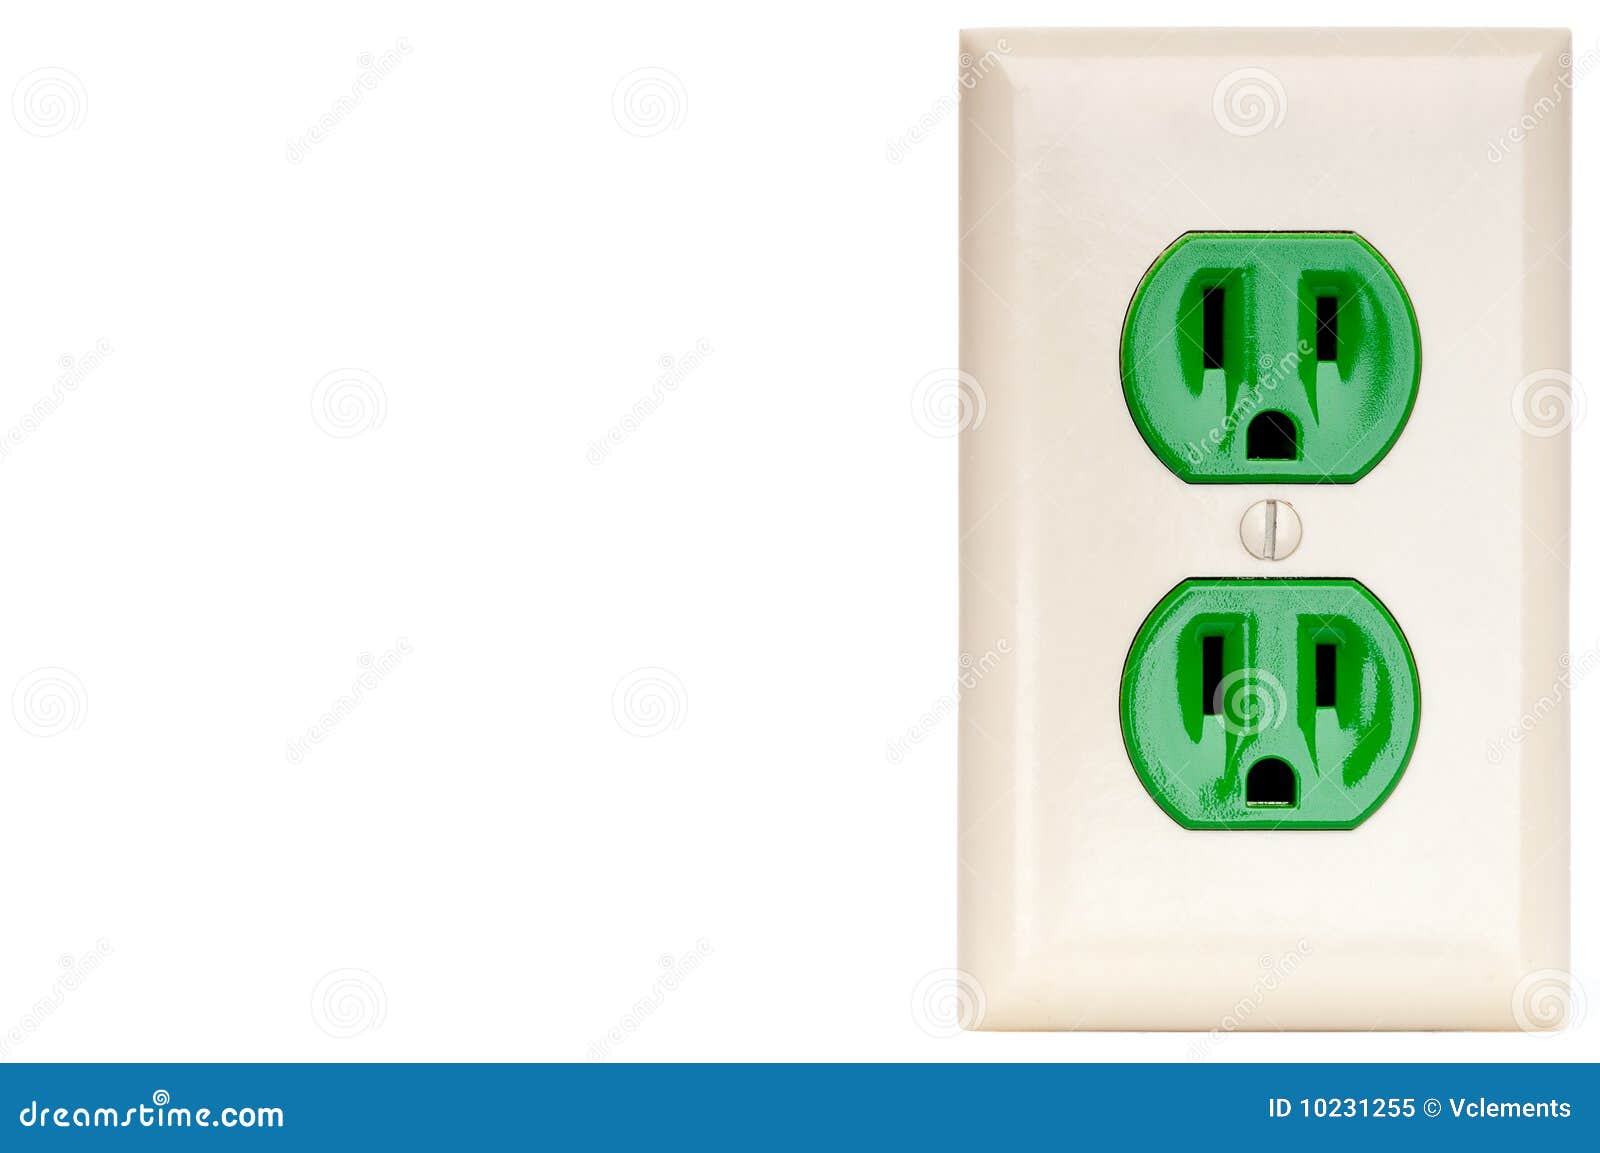 a green power outlet receptacle